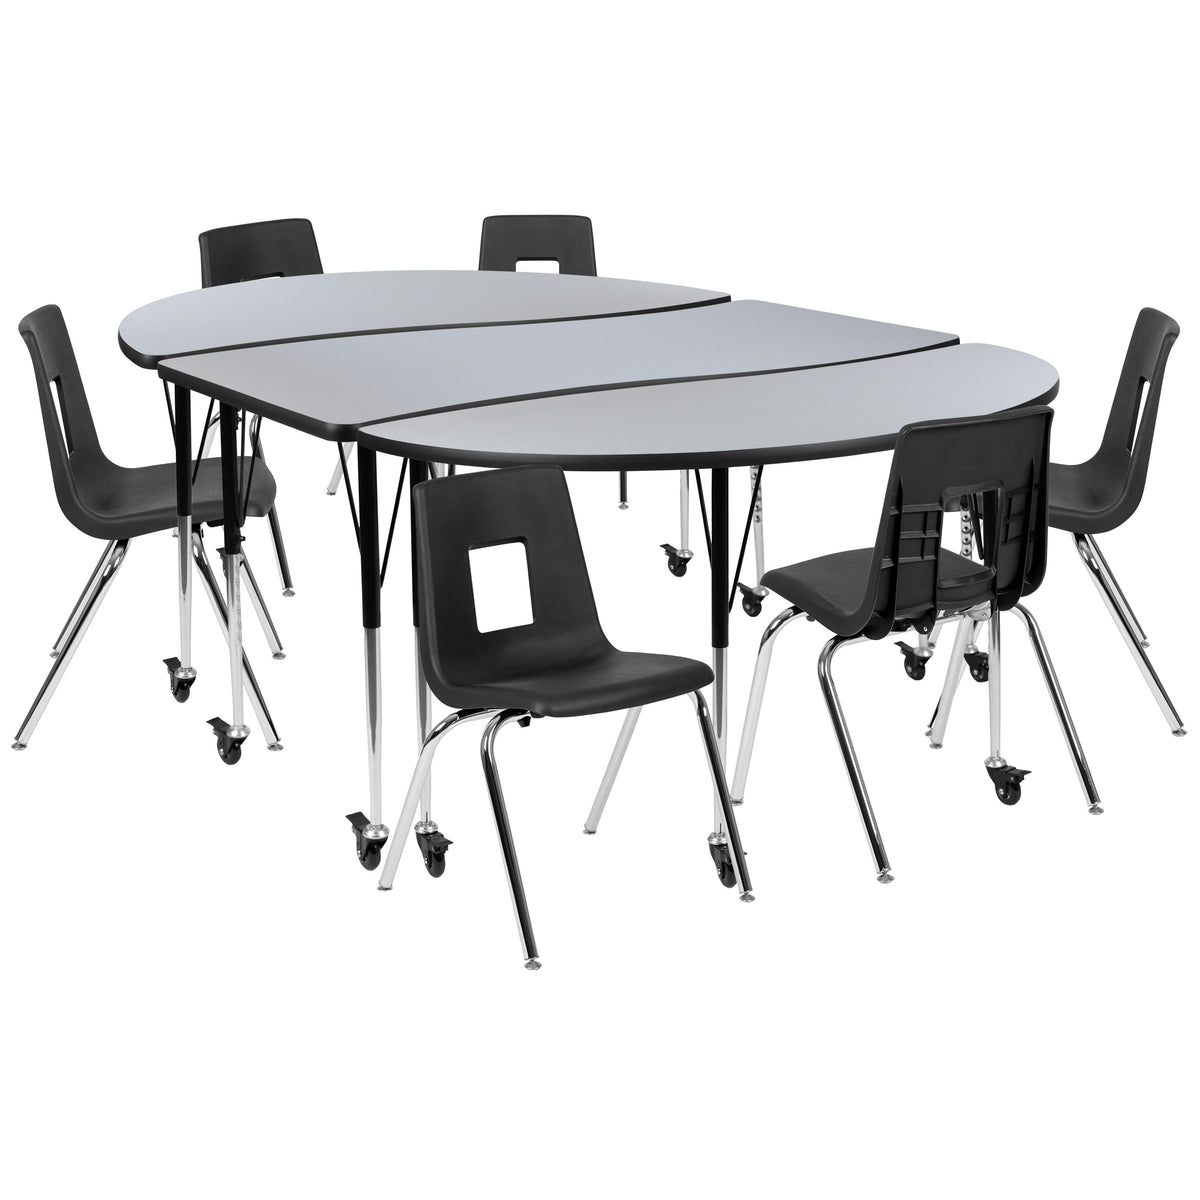 Grey |#| Mobile 86inch Oval Wave Activity Table Set-18inch Student Stack Chairs, Grey/Black